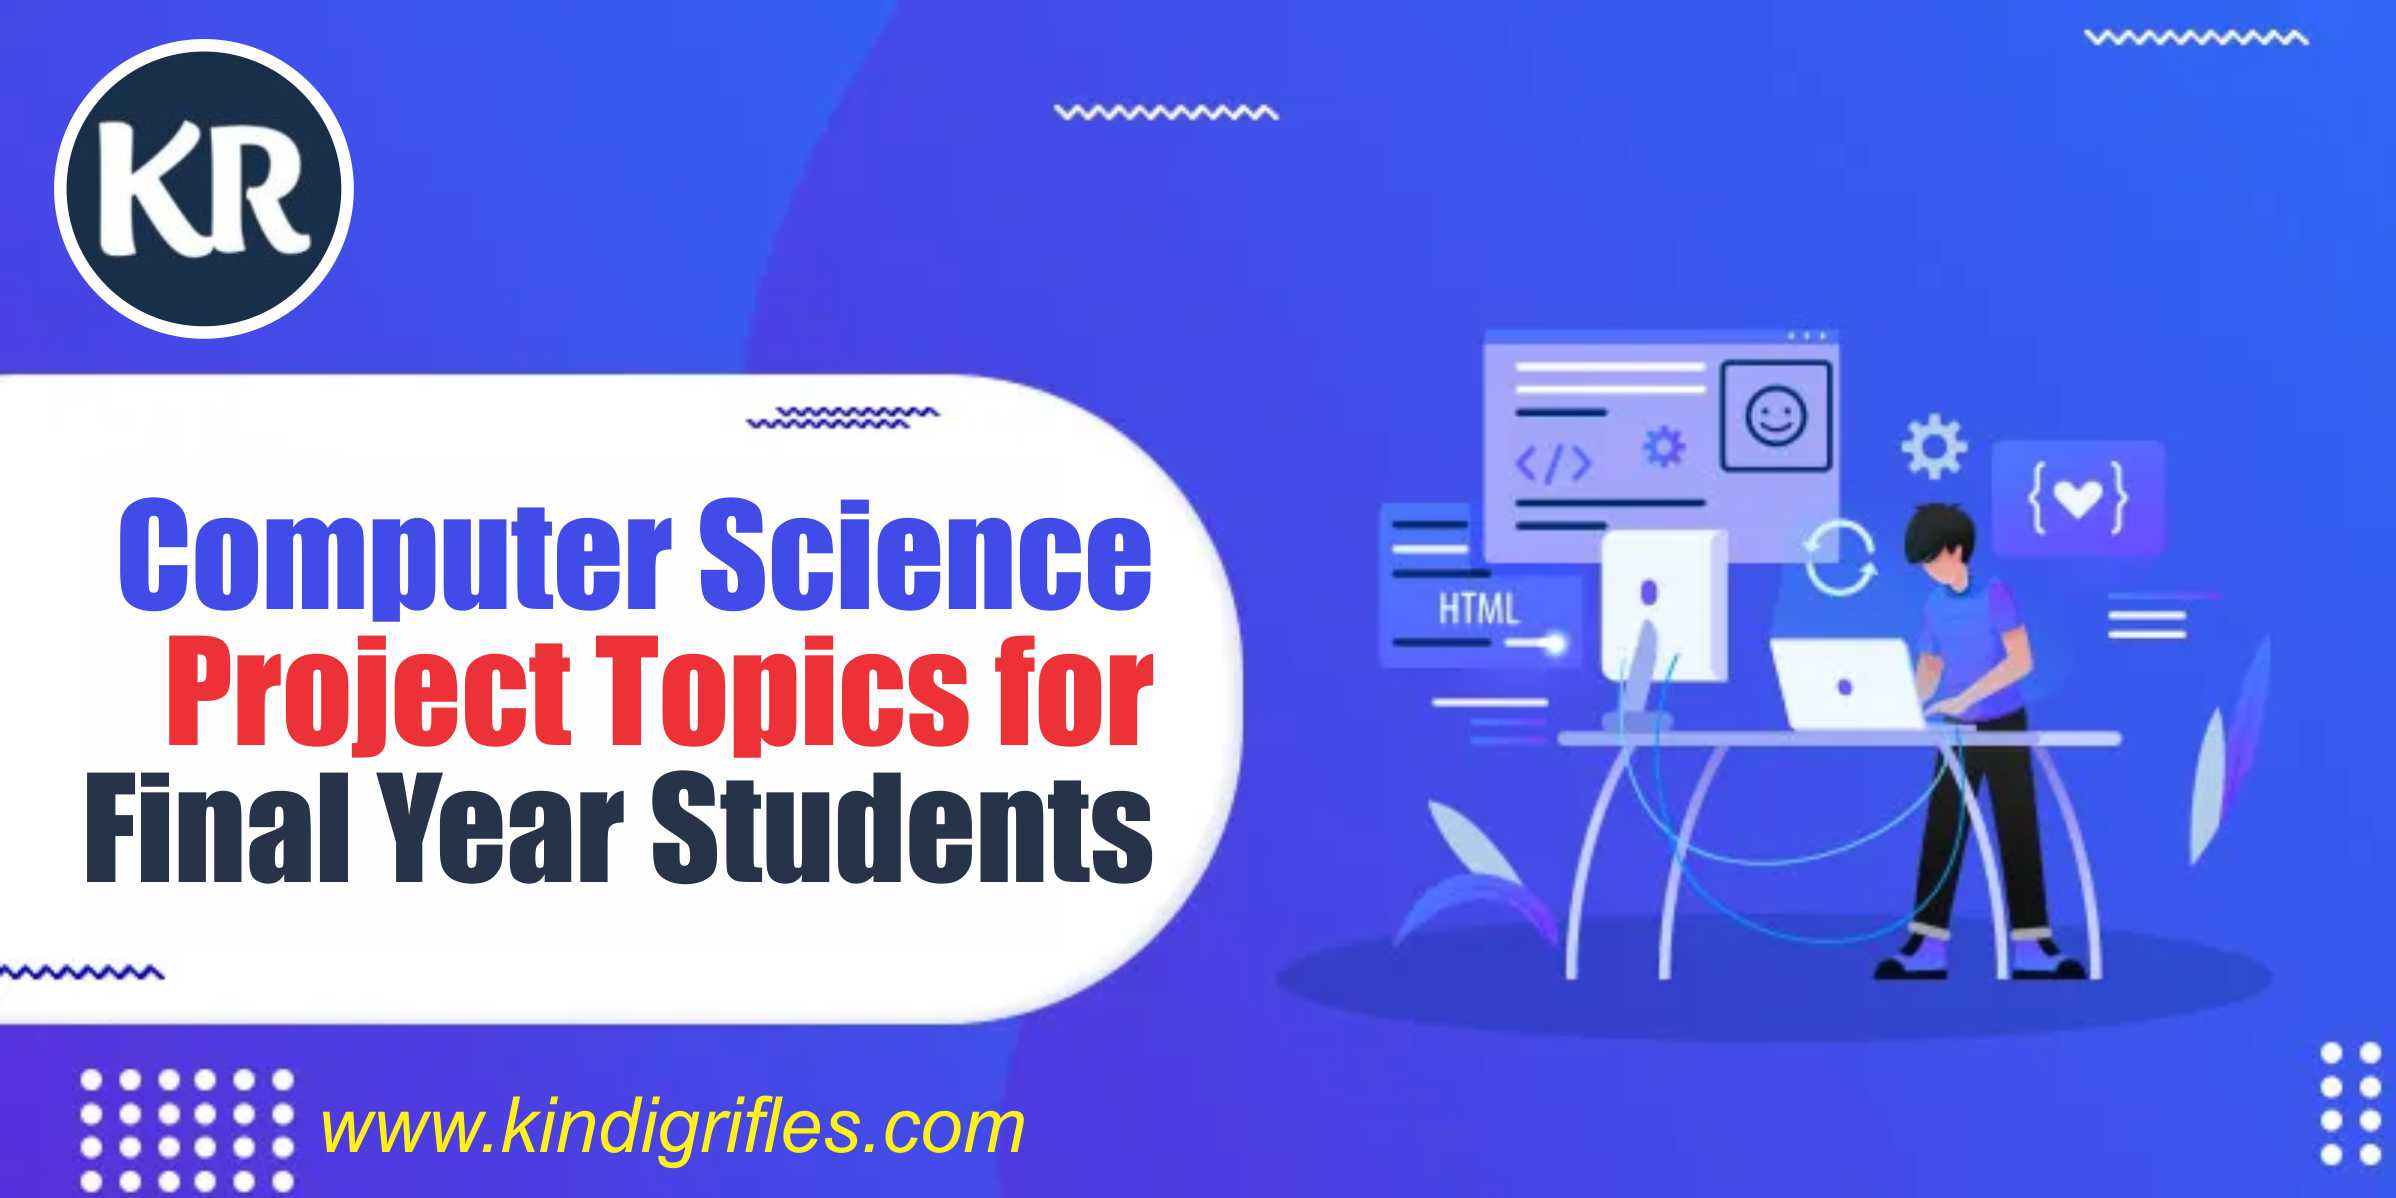 Computer Science Project Topics for Final Year Students